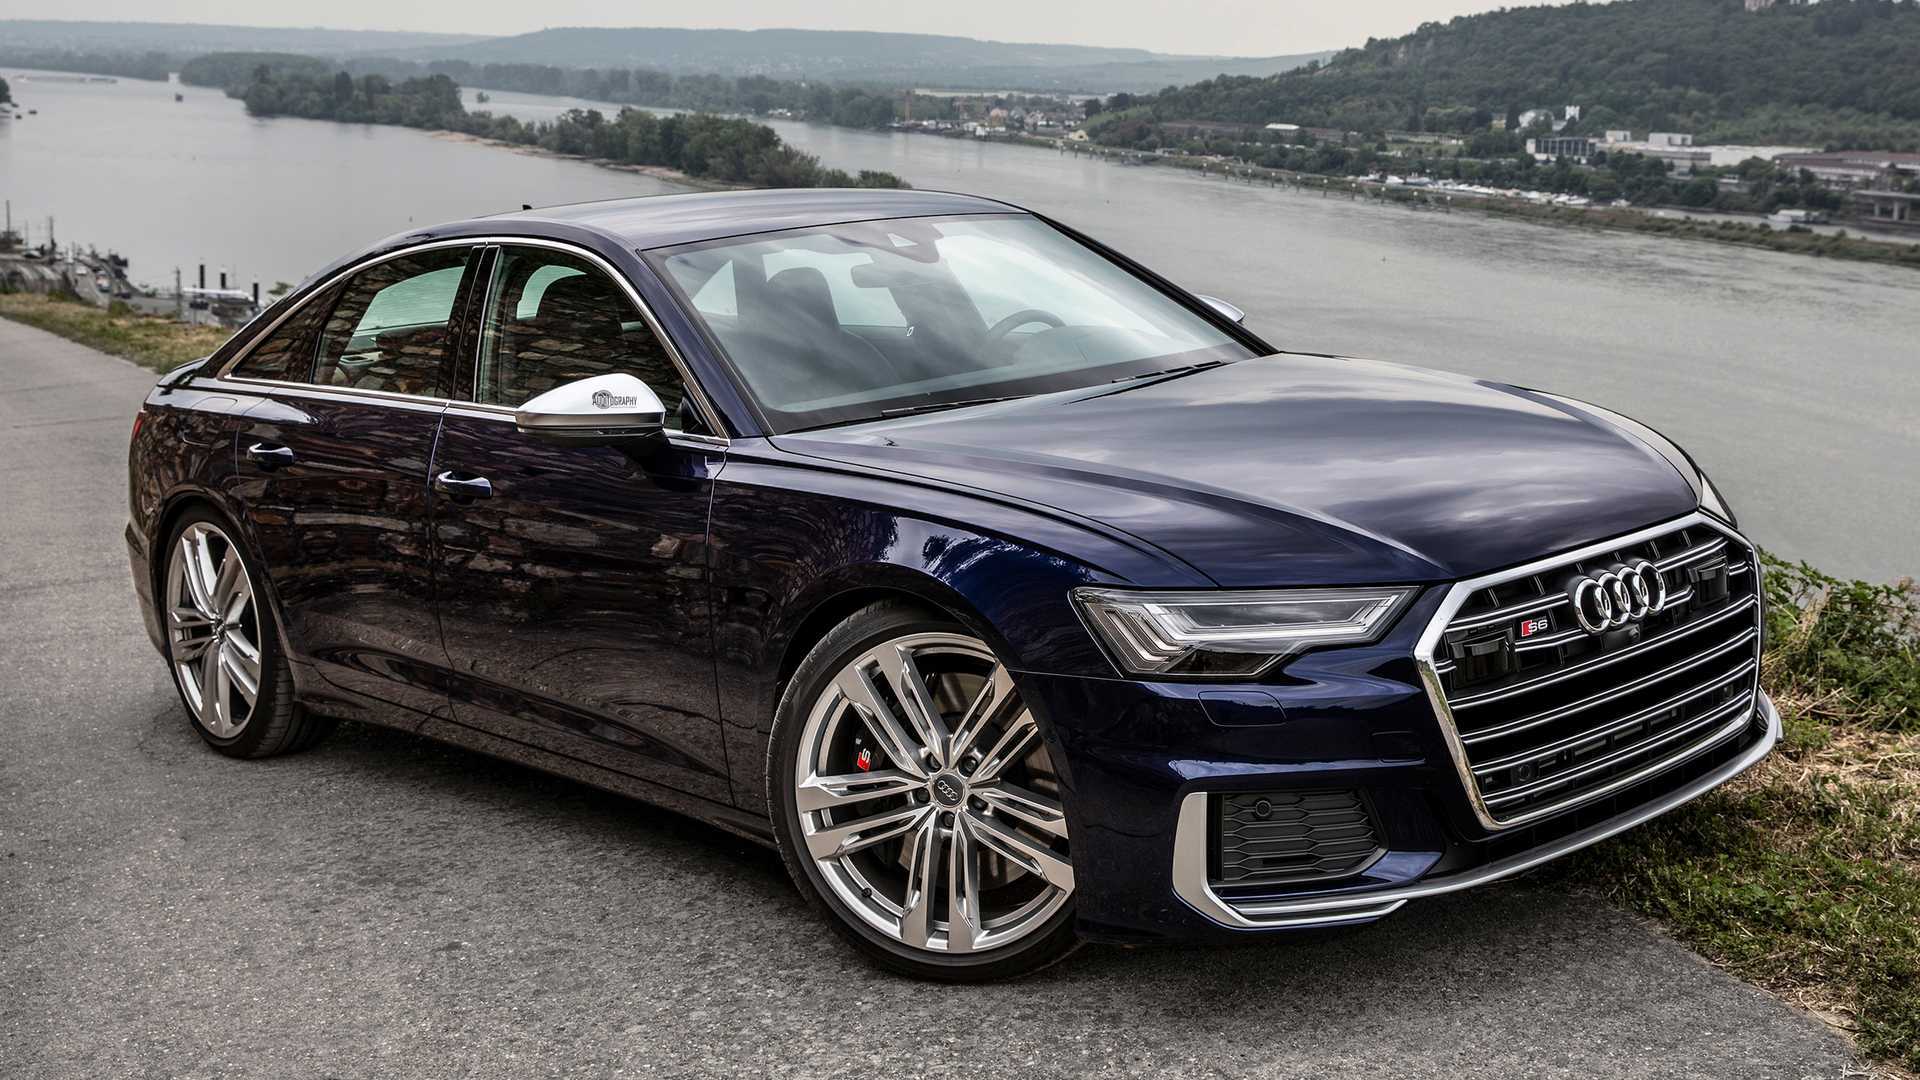 2020 Audi S6 Sedan Shows It's The Whole Package On Video